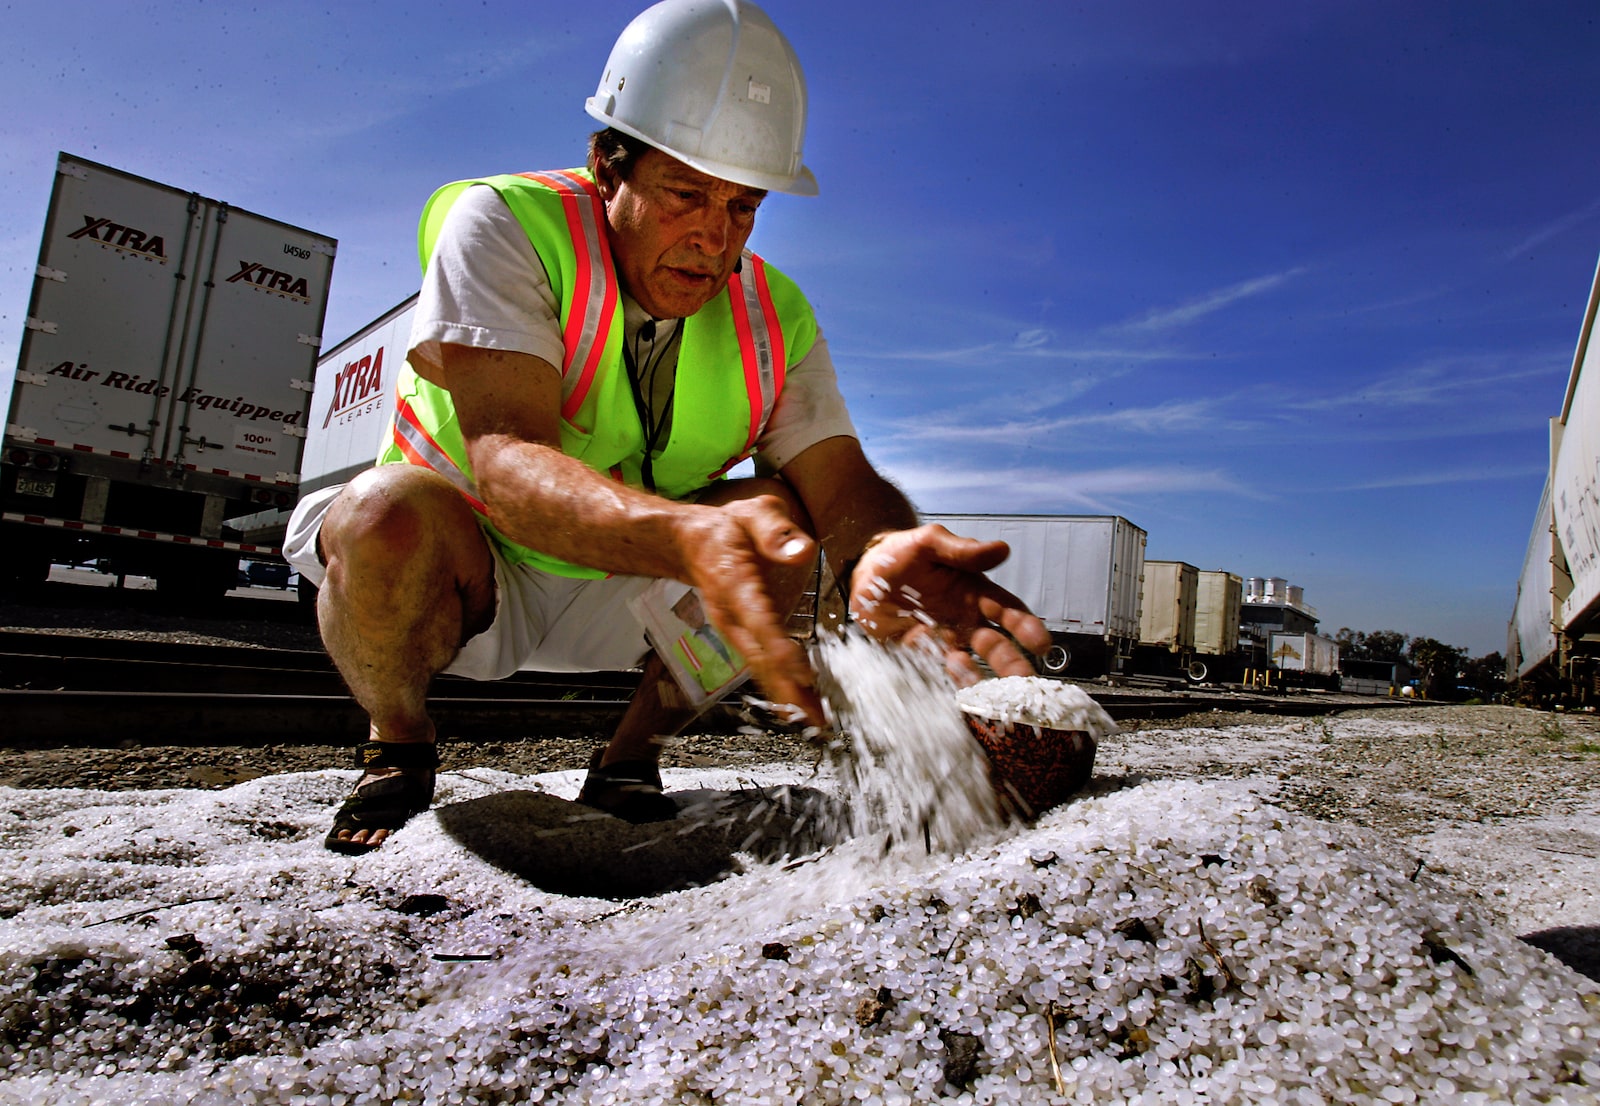 Charles Moore holds up nurdles on the floor outside of a production plant in Vernon, CA.